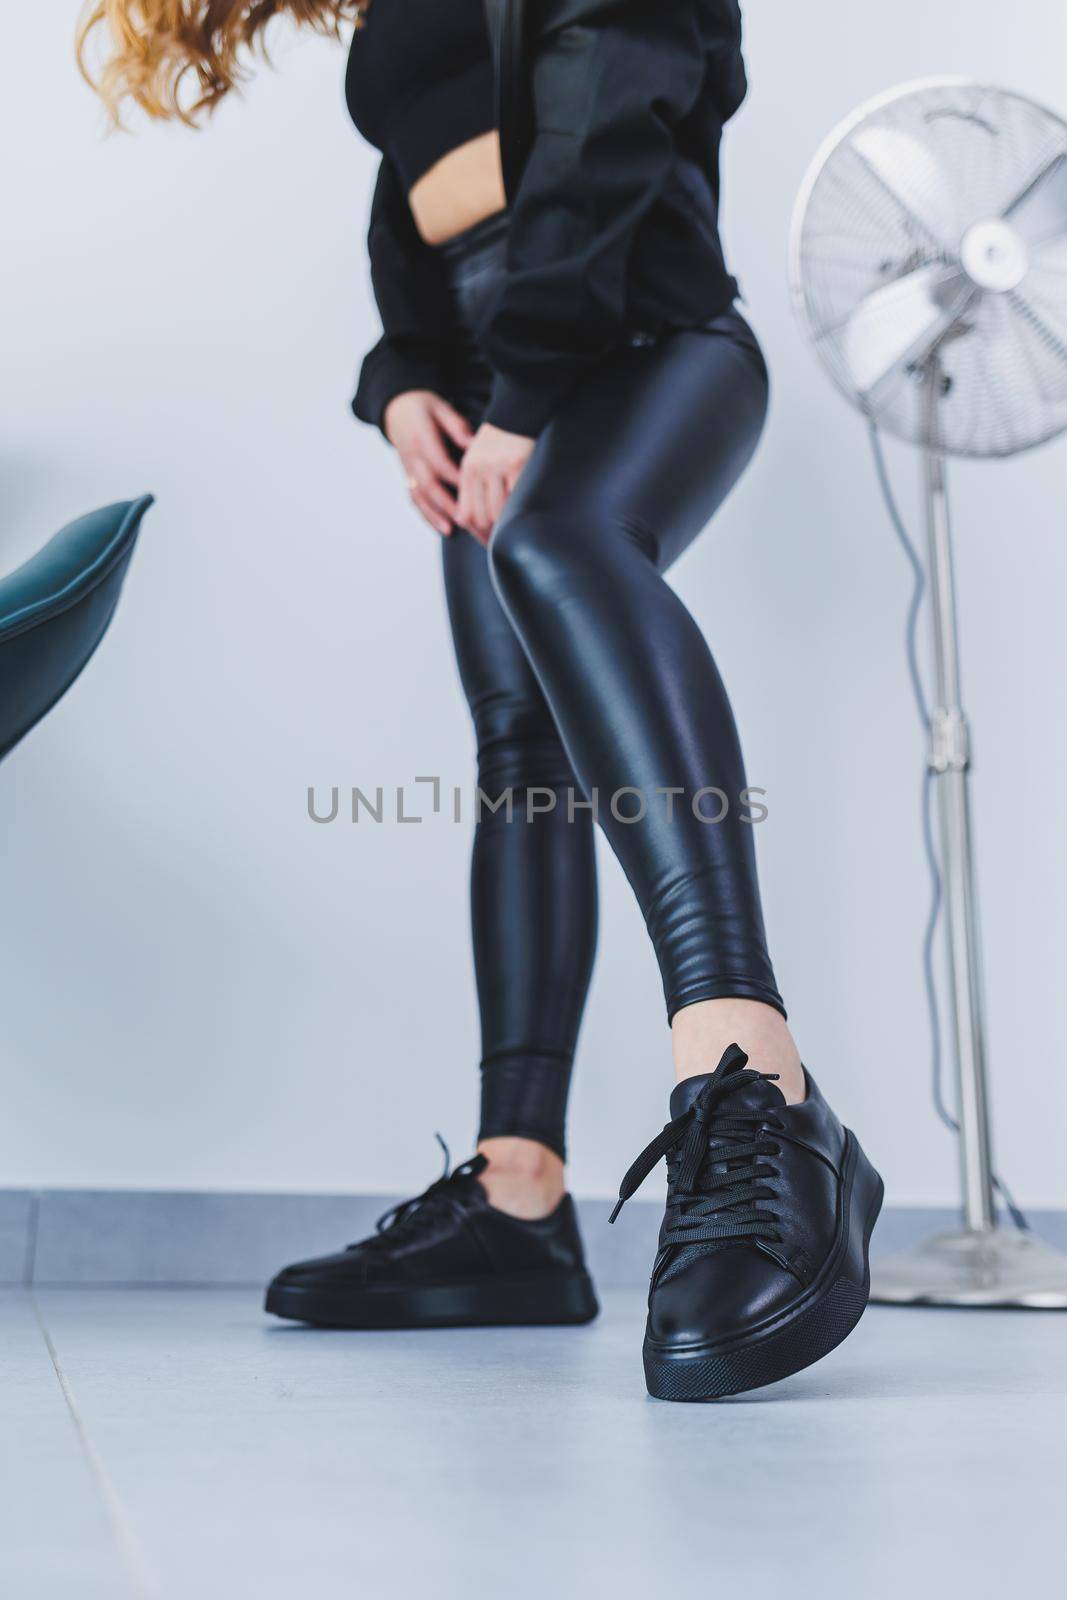 New collection of women's leather shoes, female legs close-up in black lace-up sneakers. Shoes for spring and summer by Dmitrytph